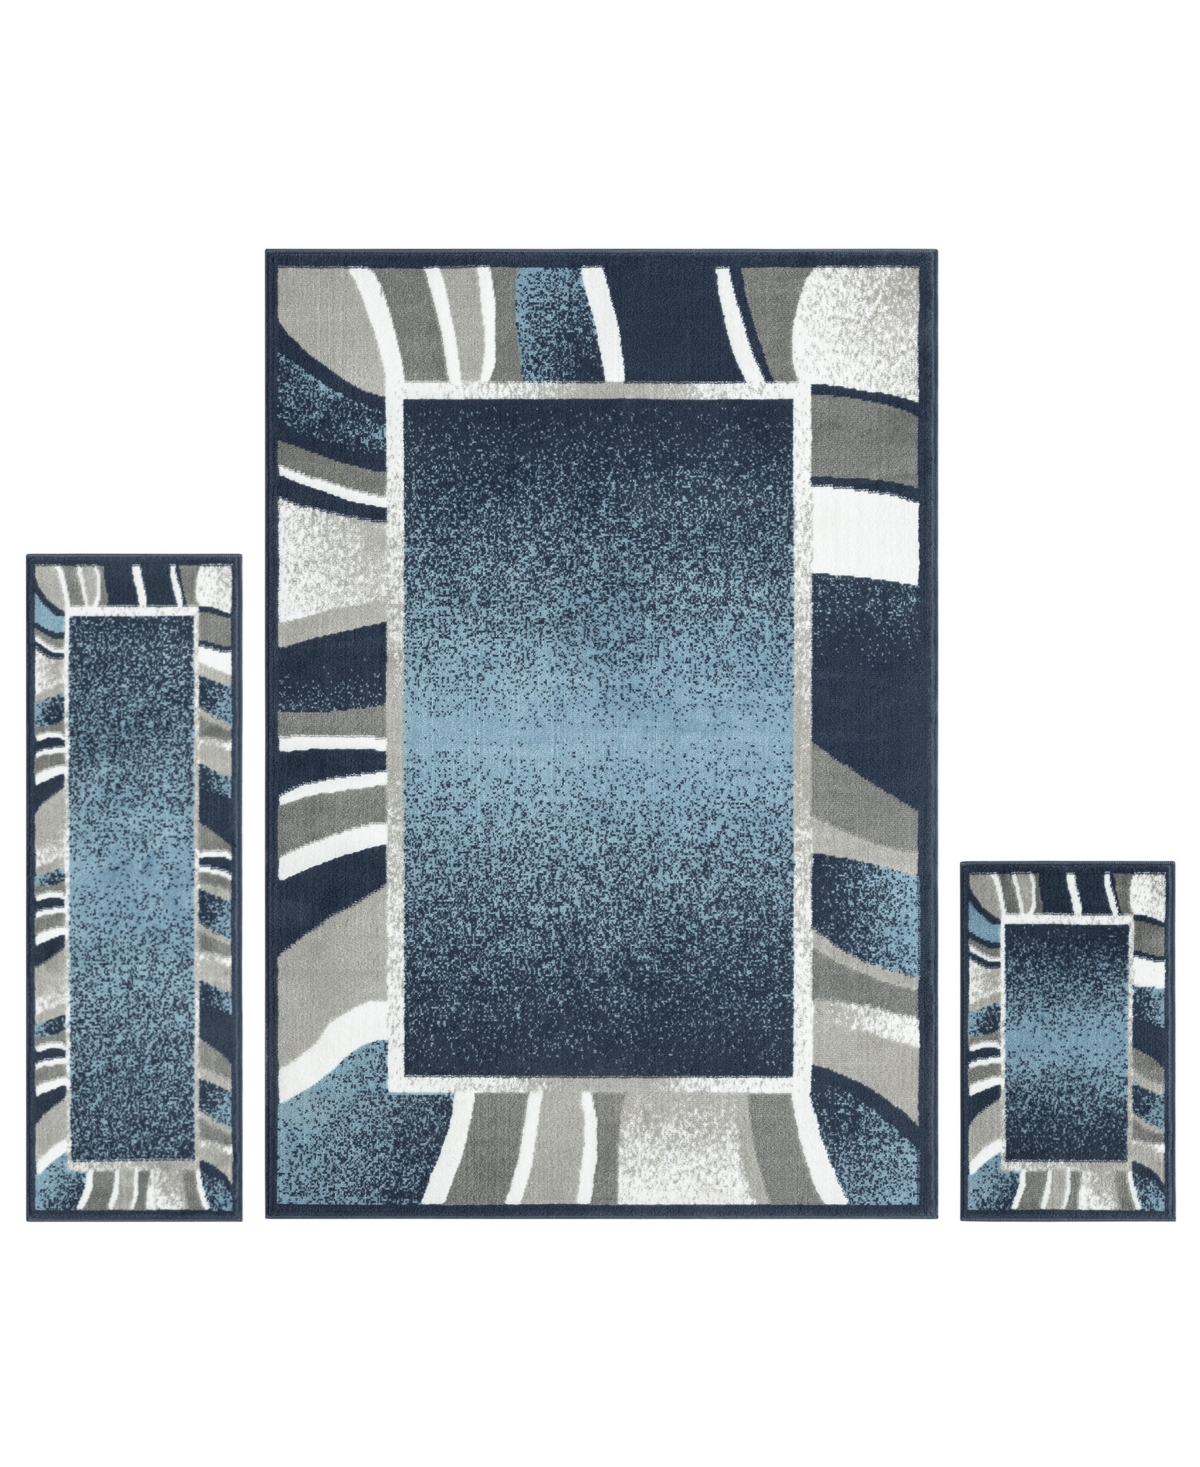 Global Rug Designs Loma Lom03 Area Rug Set, 3 Piece In Blue,gray